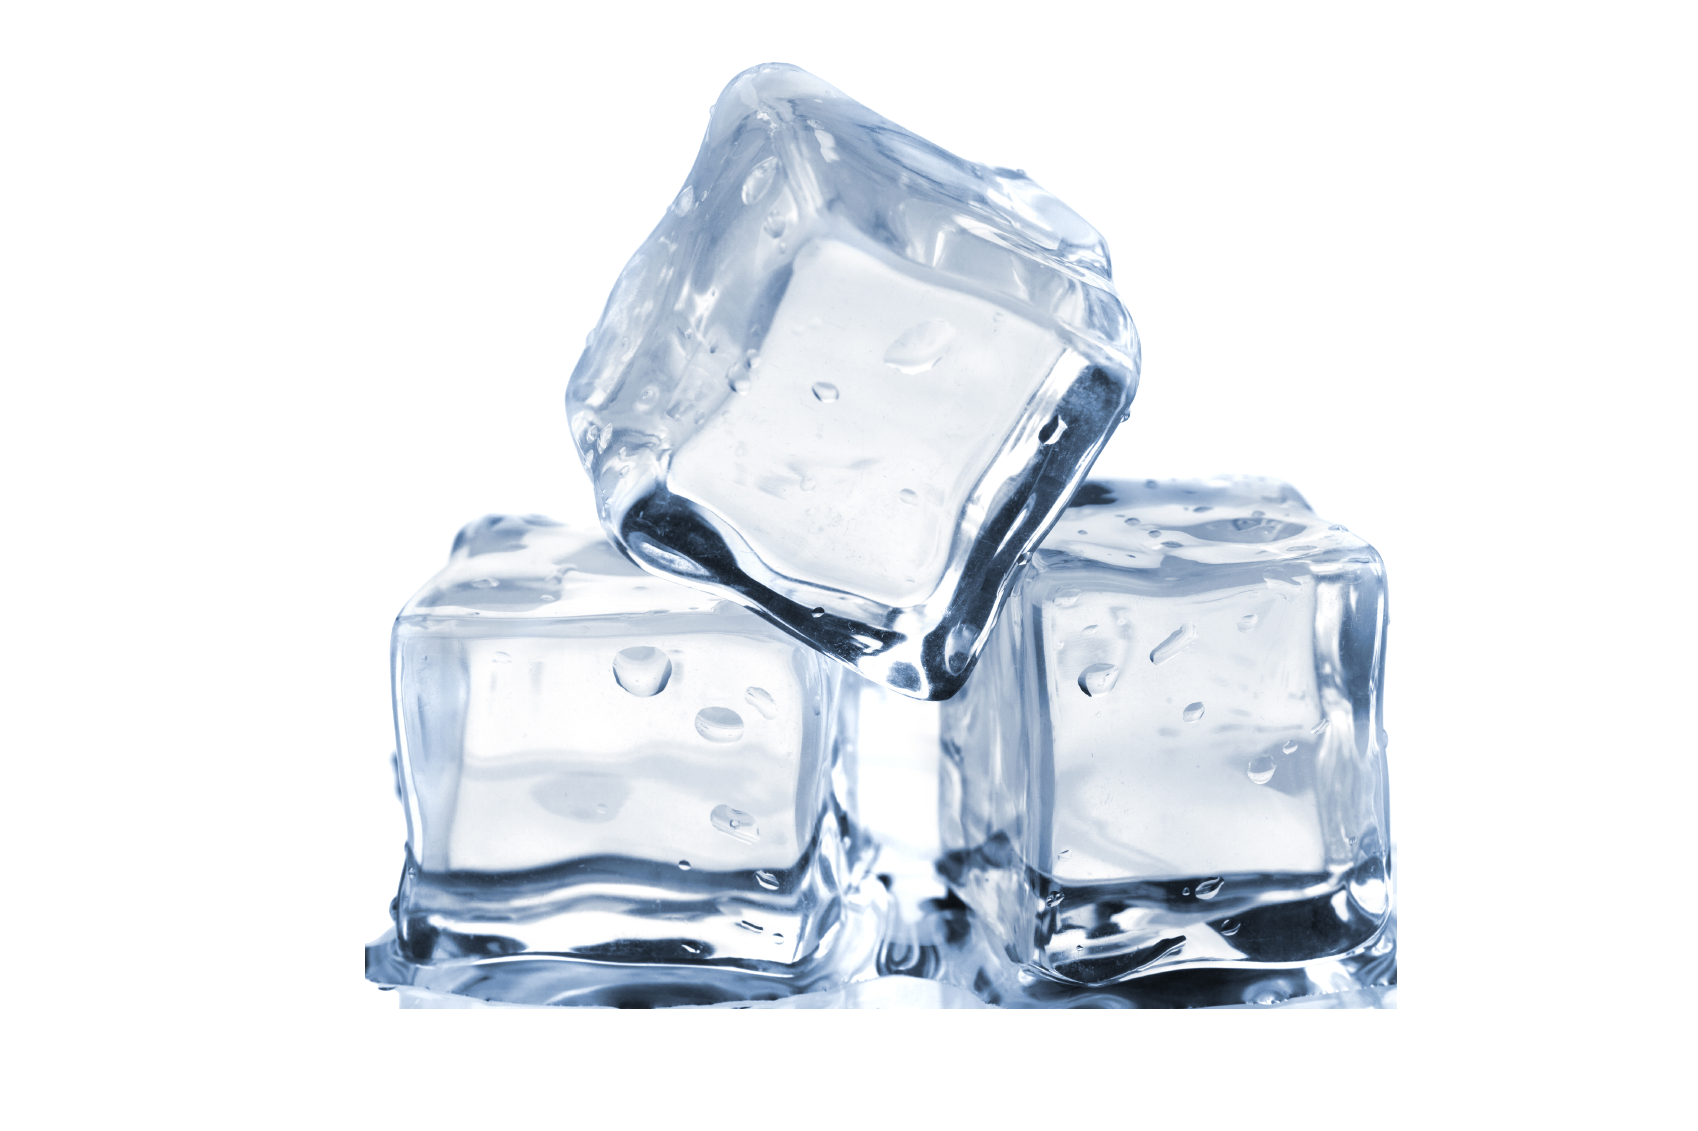 pin Ice Cube clipart snow ice